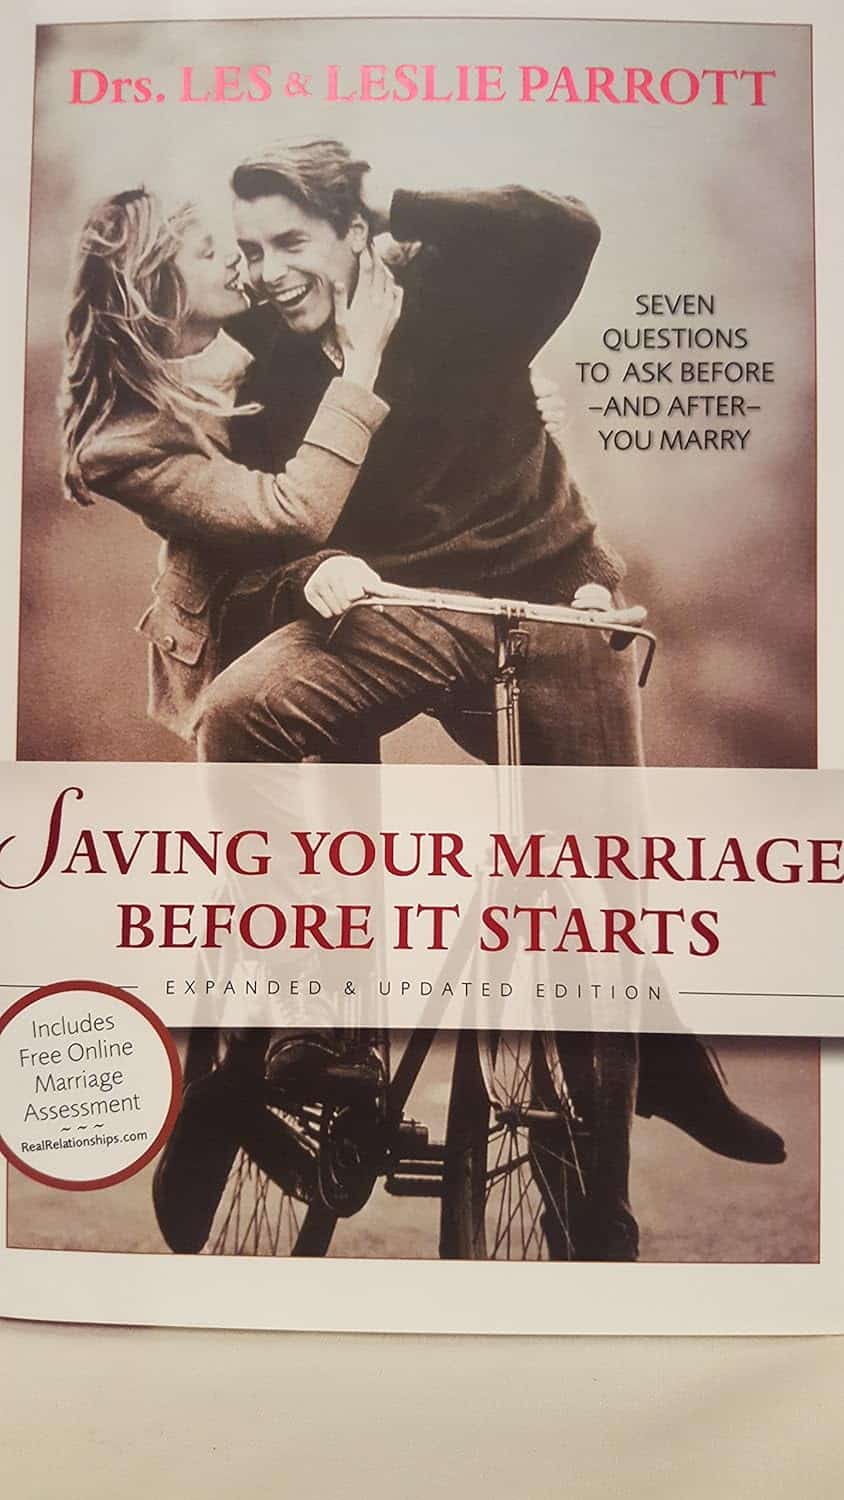 Saving Your Marriage Before It Starts by Drs. Les and Leslie Parrott